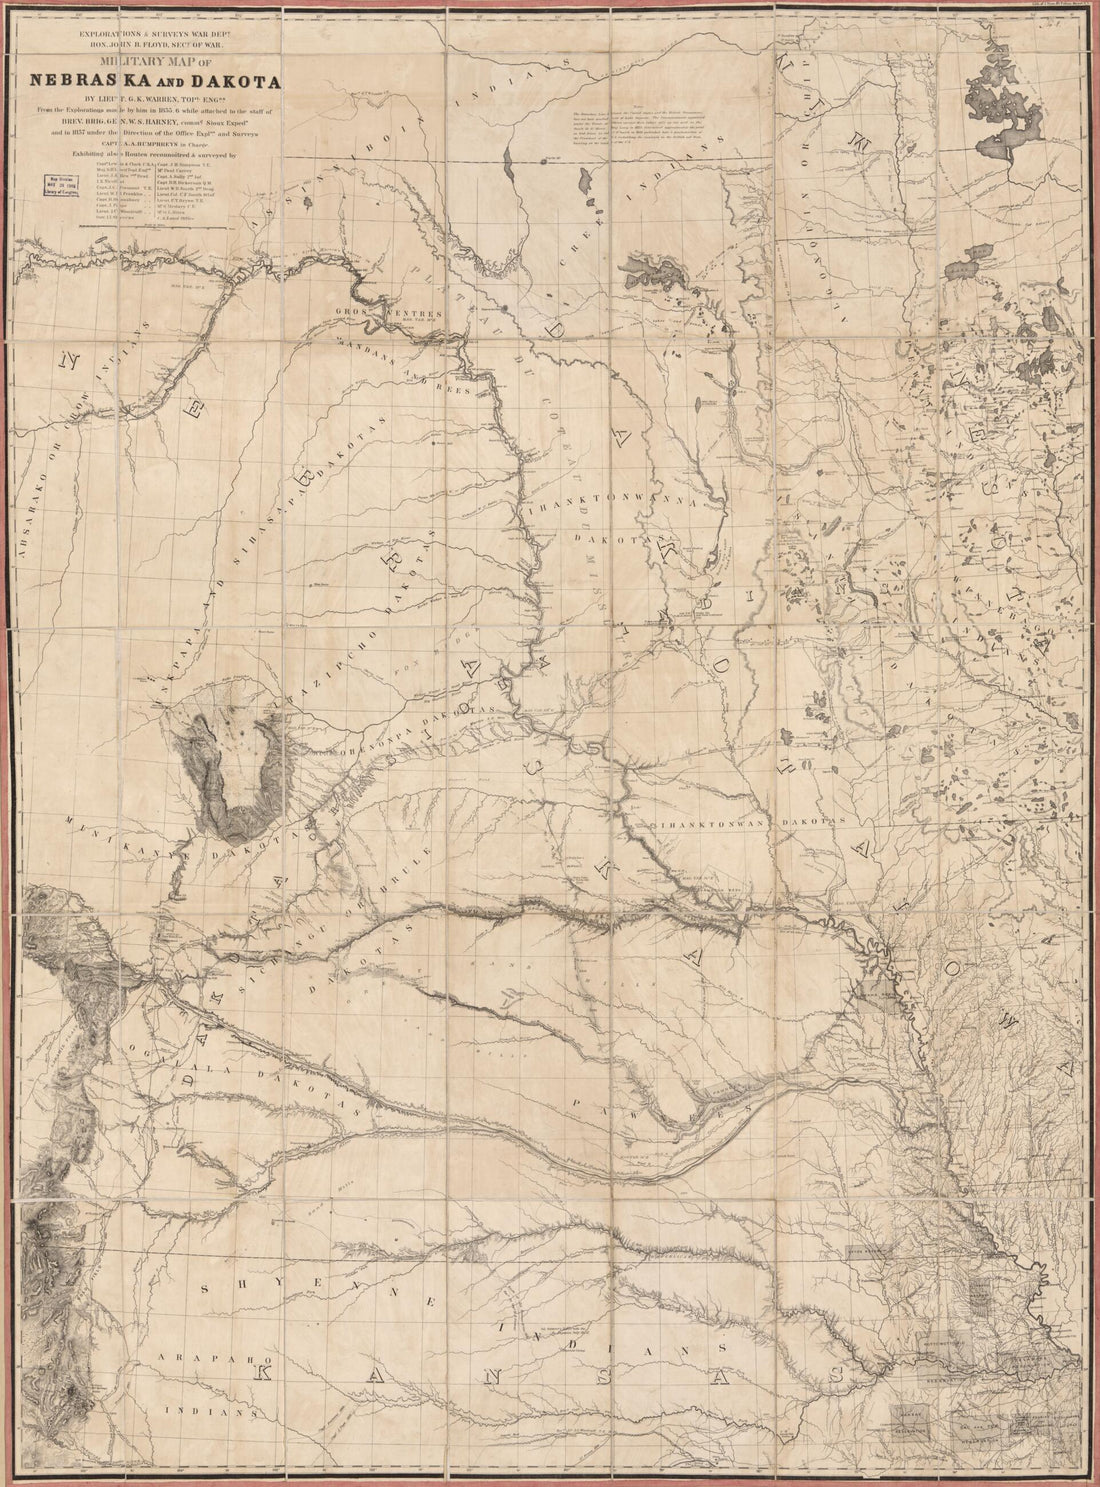 This old map of Military Map of Nebraska and Dakota from 1857 was created by William Clark, Meriwether Lewis,  United States. Office of Explorations and Surveys, G. K. (Gouverneur Kemble) Warren in 1857